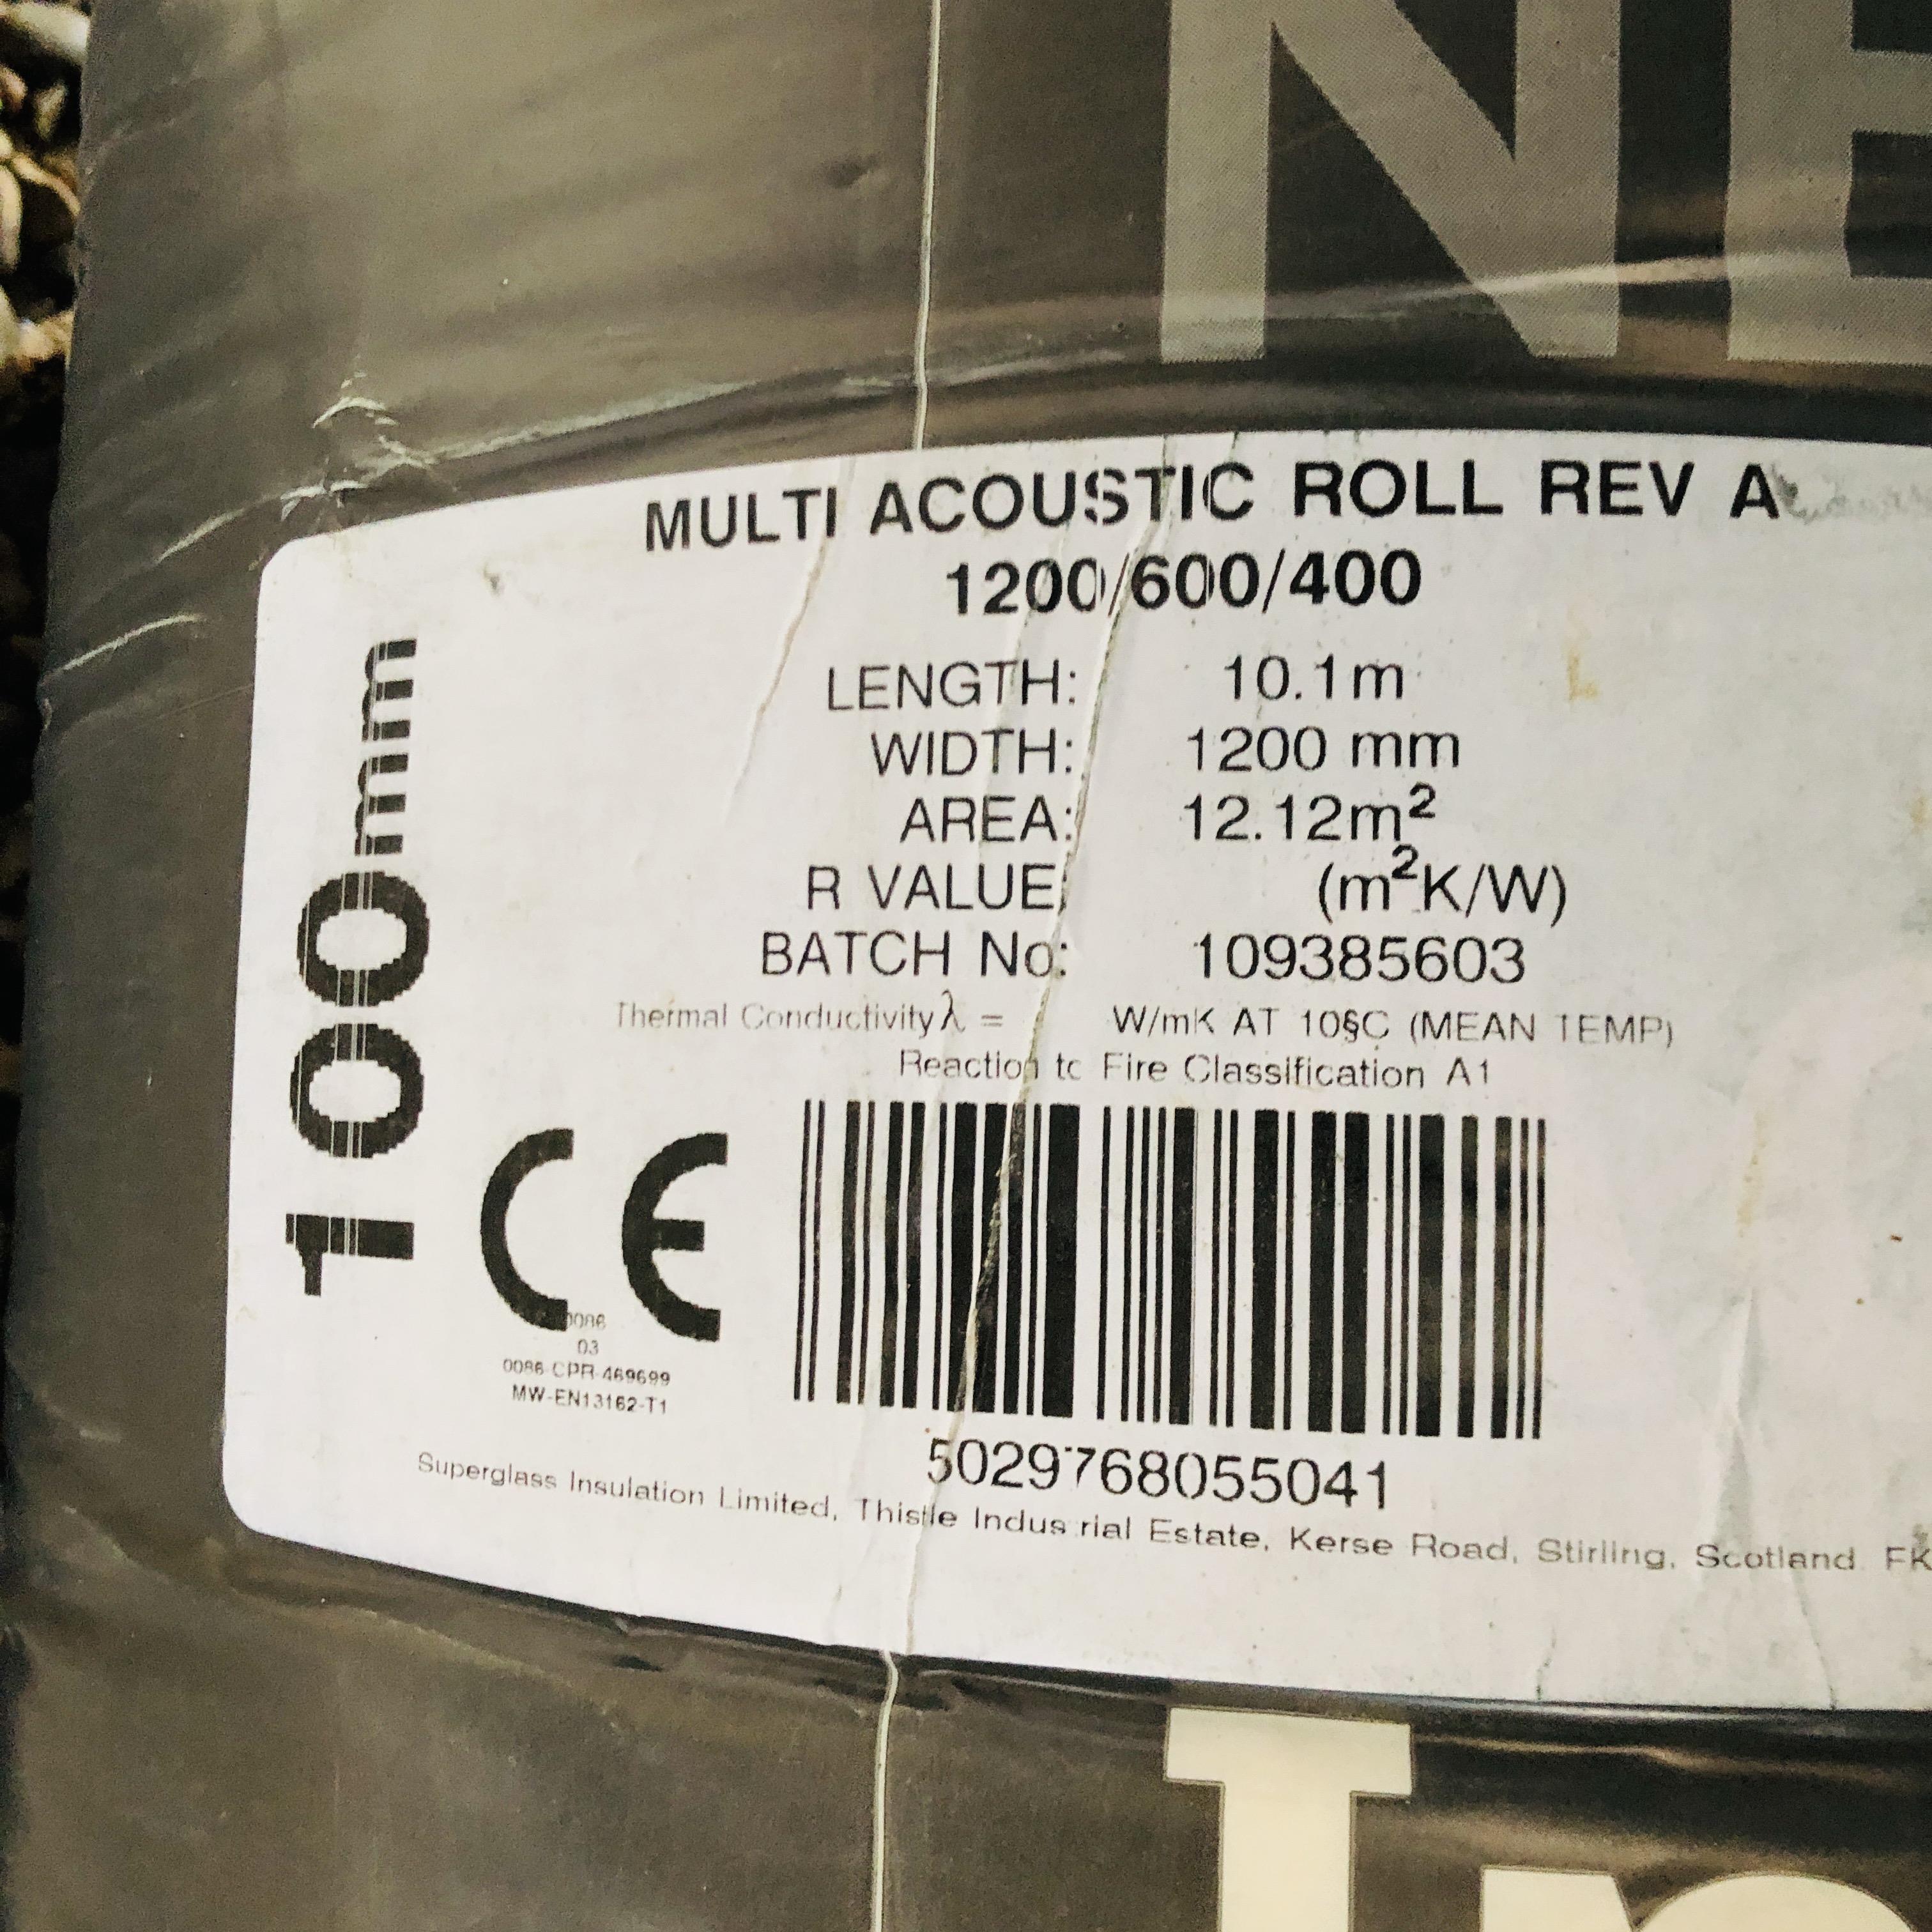 6 X ROLLS SUPERGLASS 100MM ACOUSTIC INSULATION - Image 2 of 2